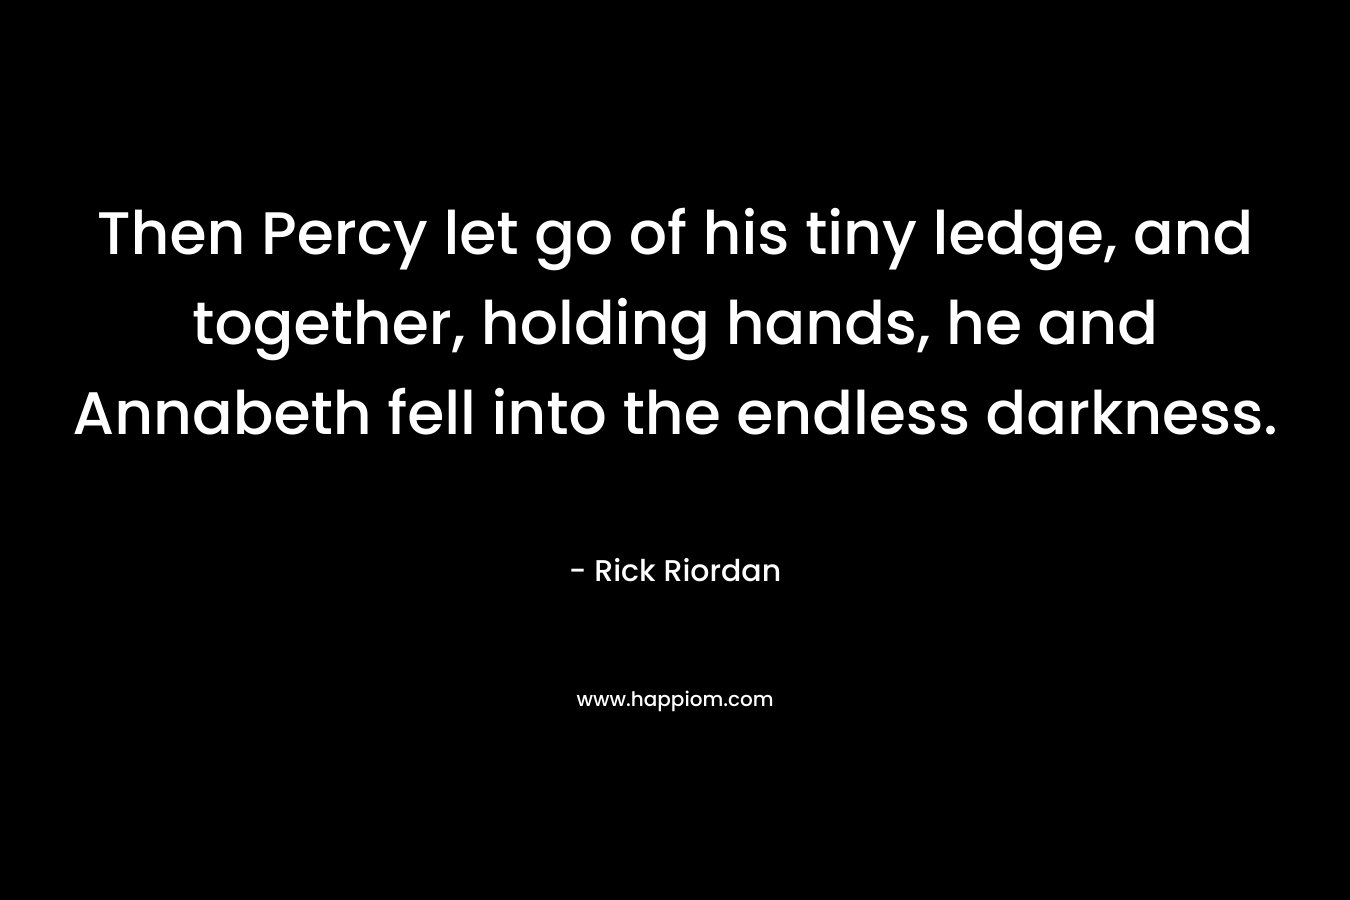 Then Percy let go of his tiny ledge, and together, holding hands, he and Annabeth fell into the endless darkness.